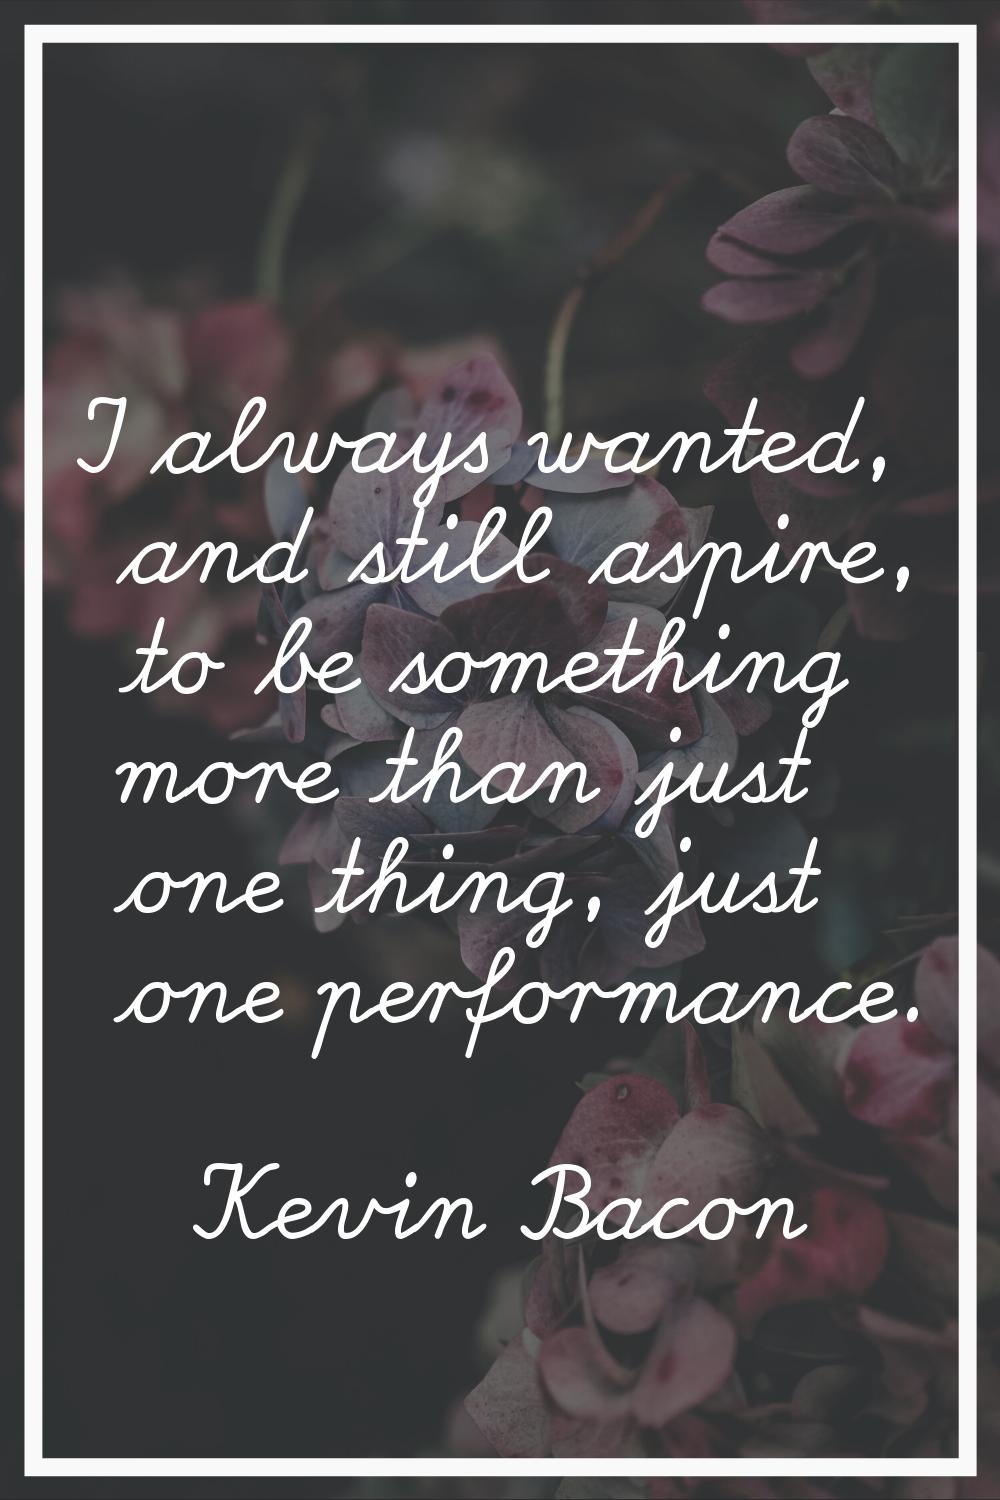 I always wanted, and still aspire, to be something more than just one thing, just one performance.